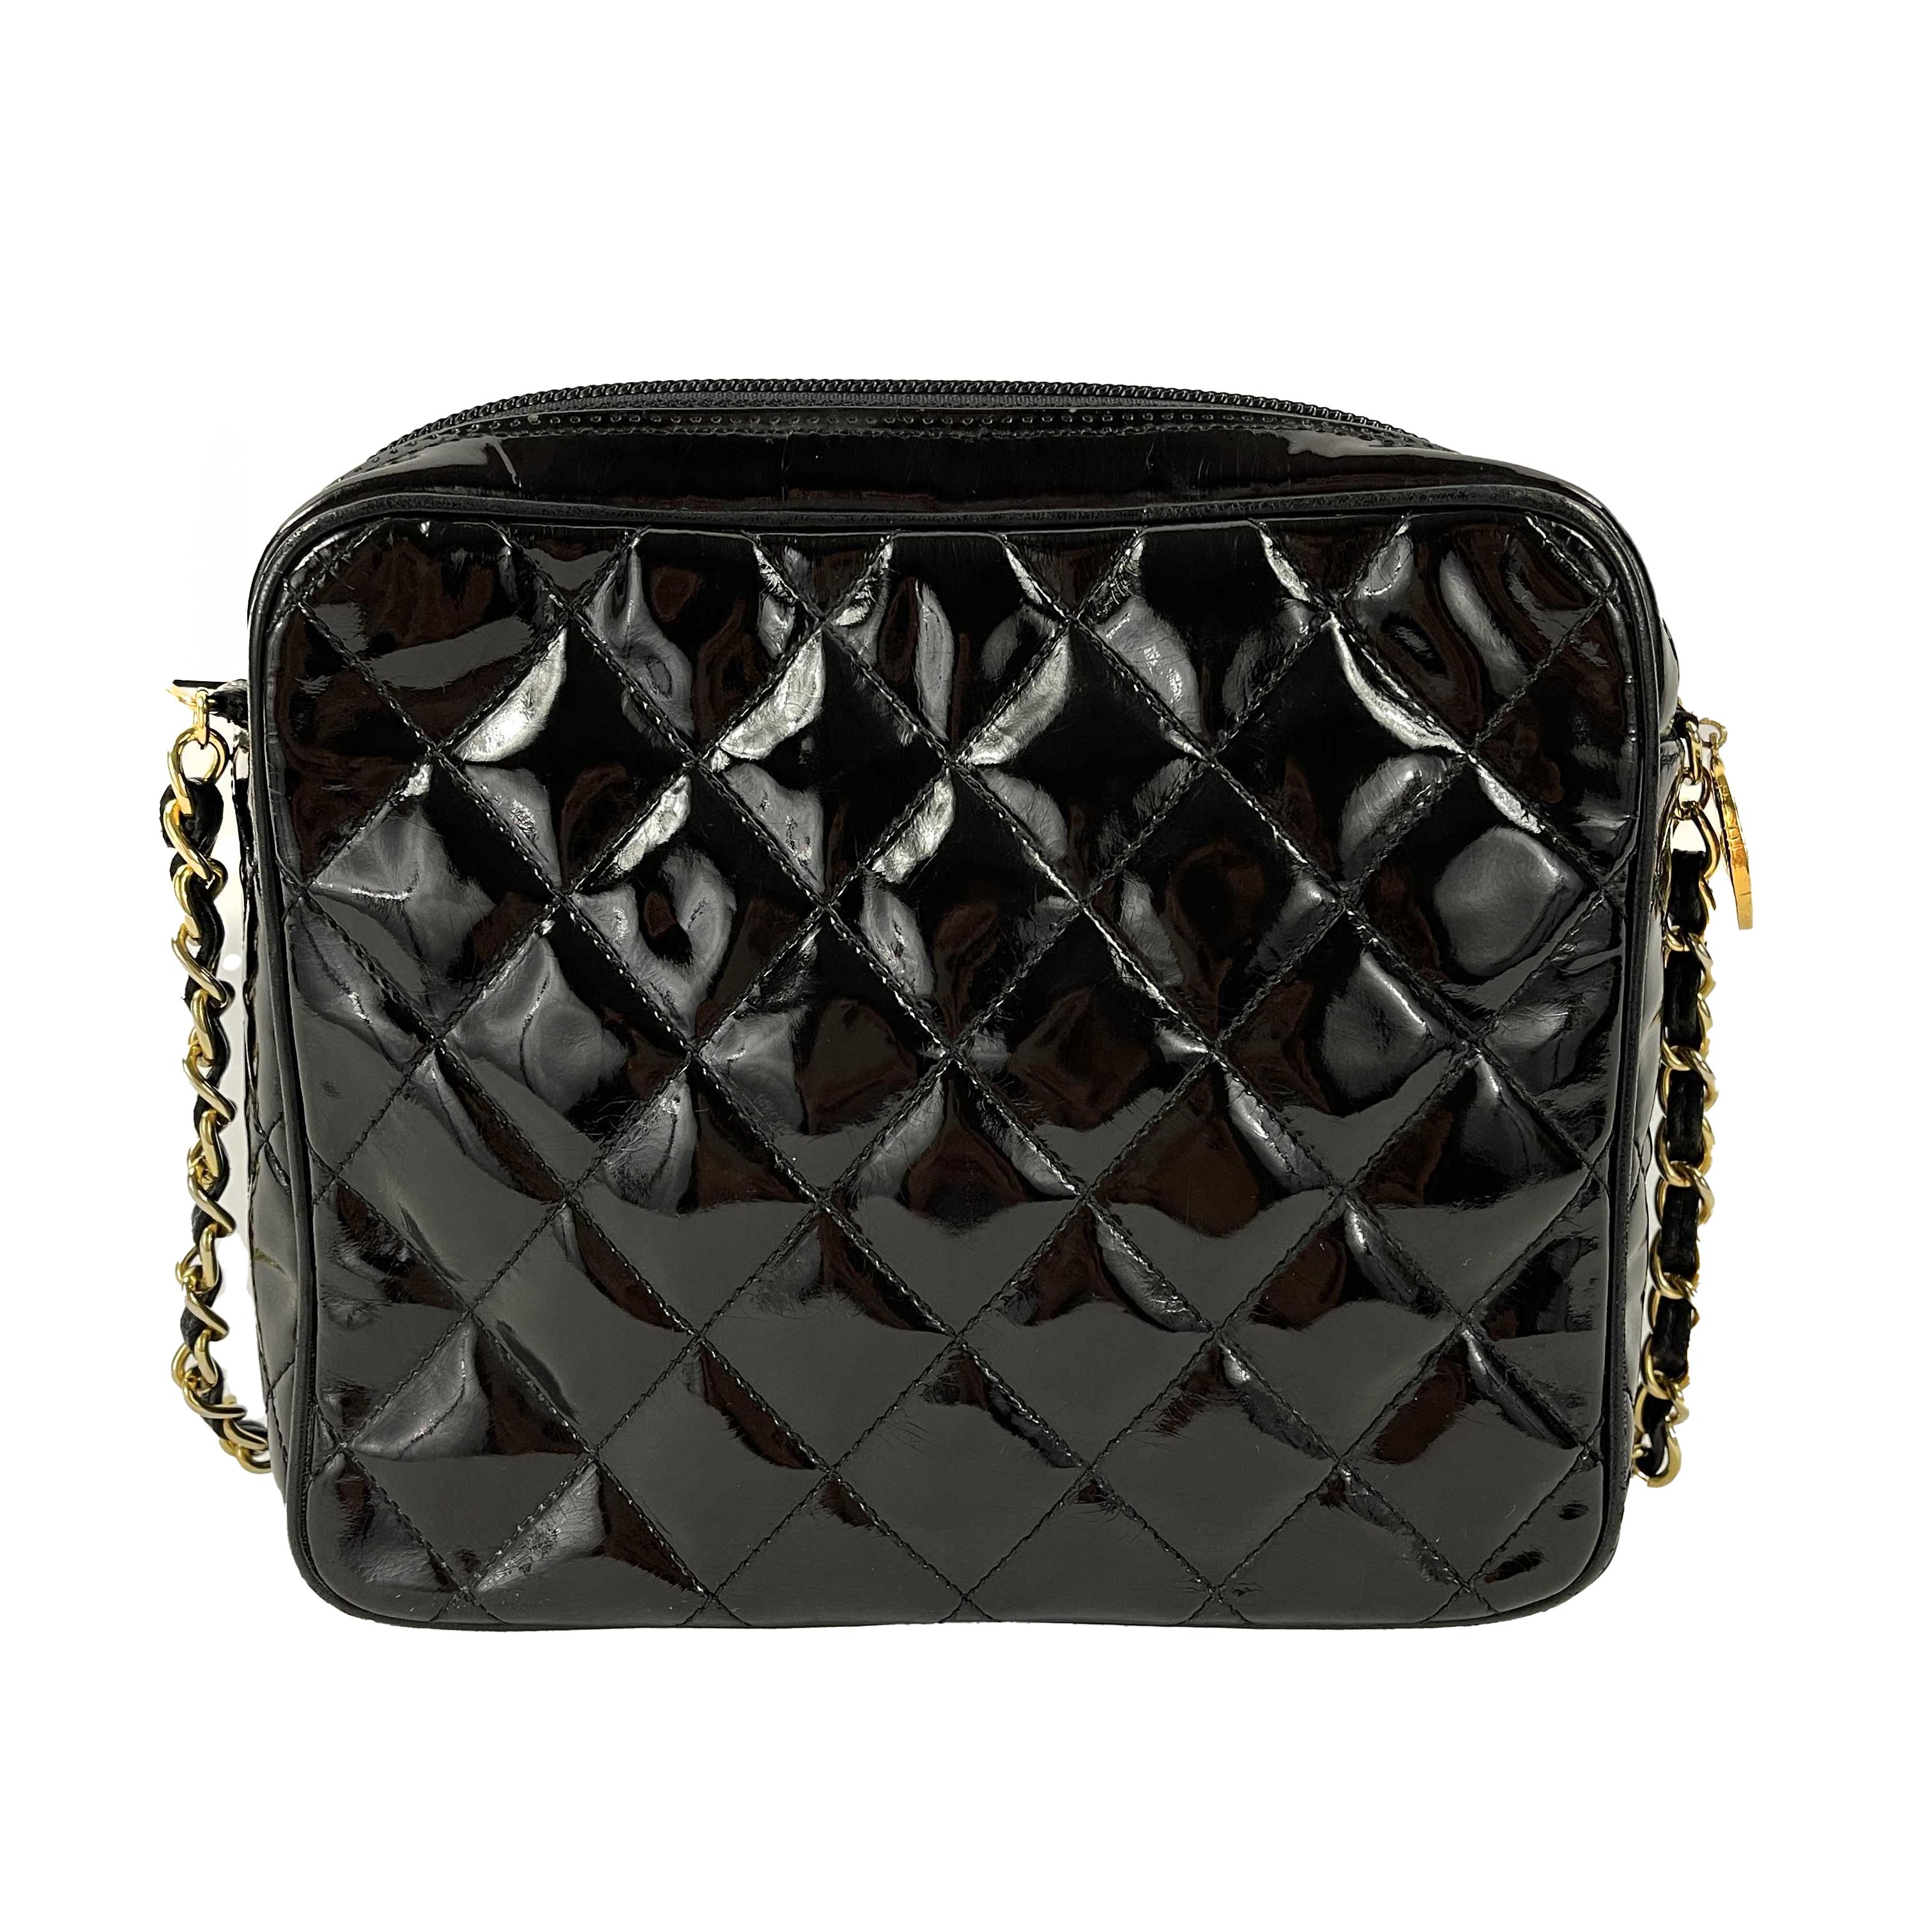 CHANEL Vintage Camera Quilted Black Patent CC Fold Over Crossbody / Shoulder Bag

Description

Vintage 1980's era collection.
Crafted in quilted black patent leather, featuring a 'CC' logo embroidered fold over flap on front pocket and engraved